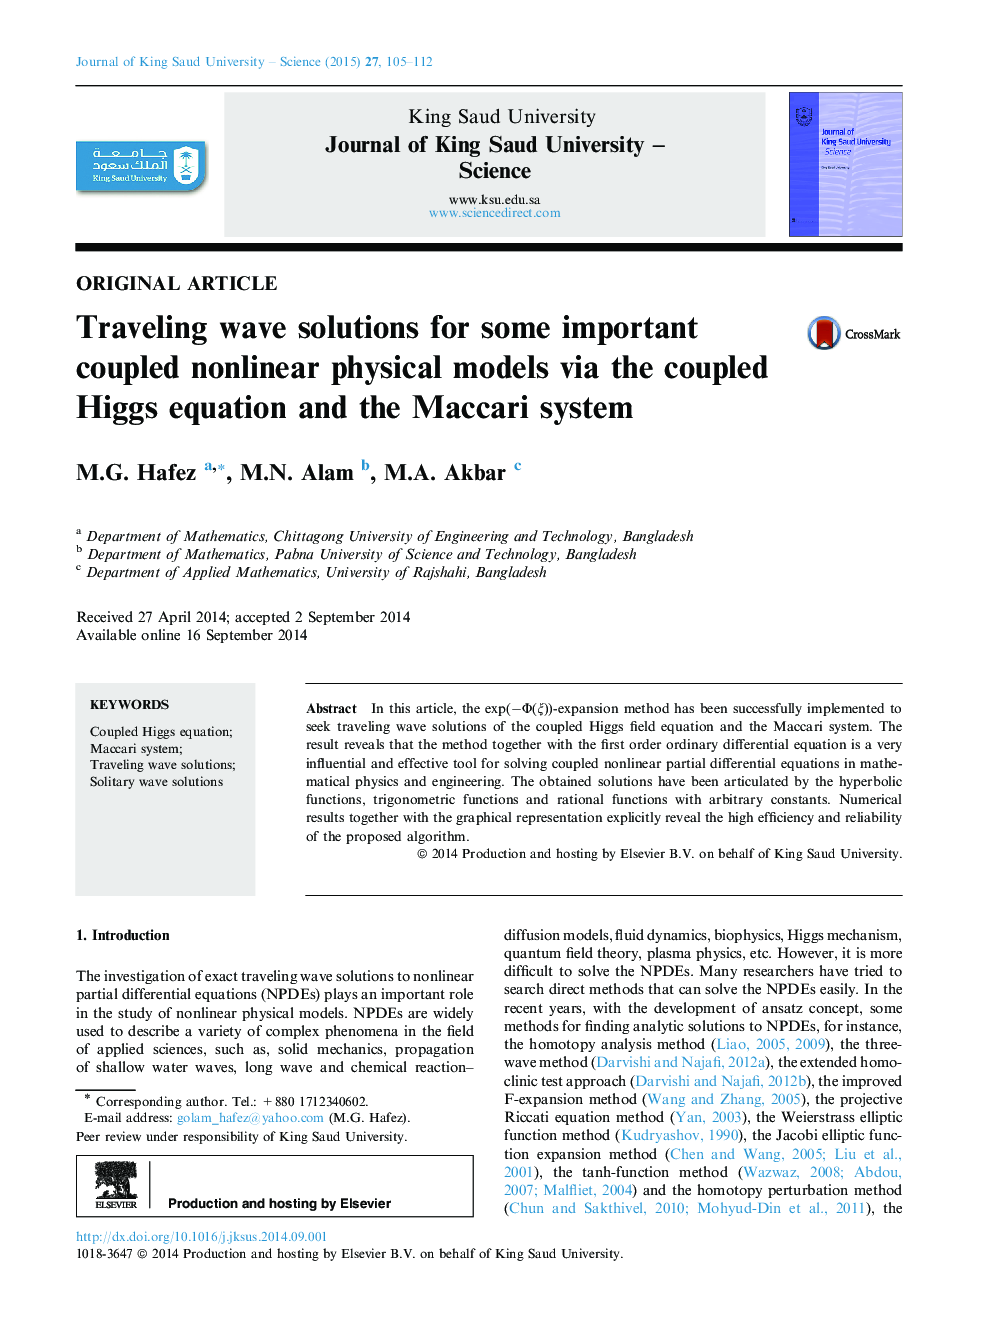 Traveling wave solutions for some important coupled nonlinear physical models via the coupled Higgs equation and the Maccari system 